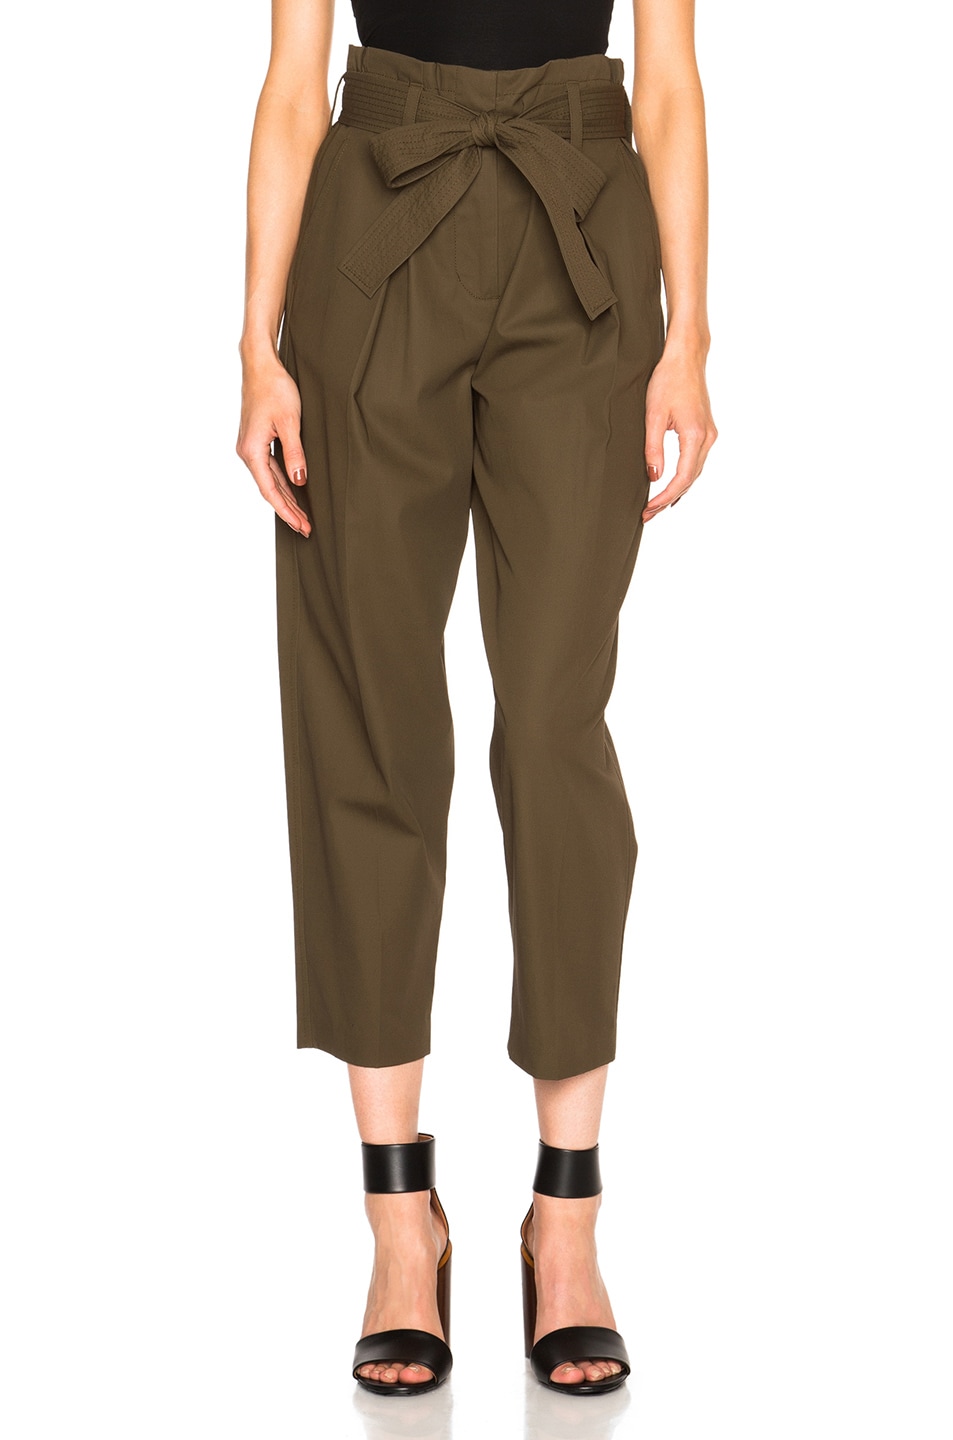 Image 1 of 3.1 phillip lim Paper Bag Pants in Loden